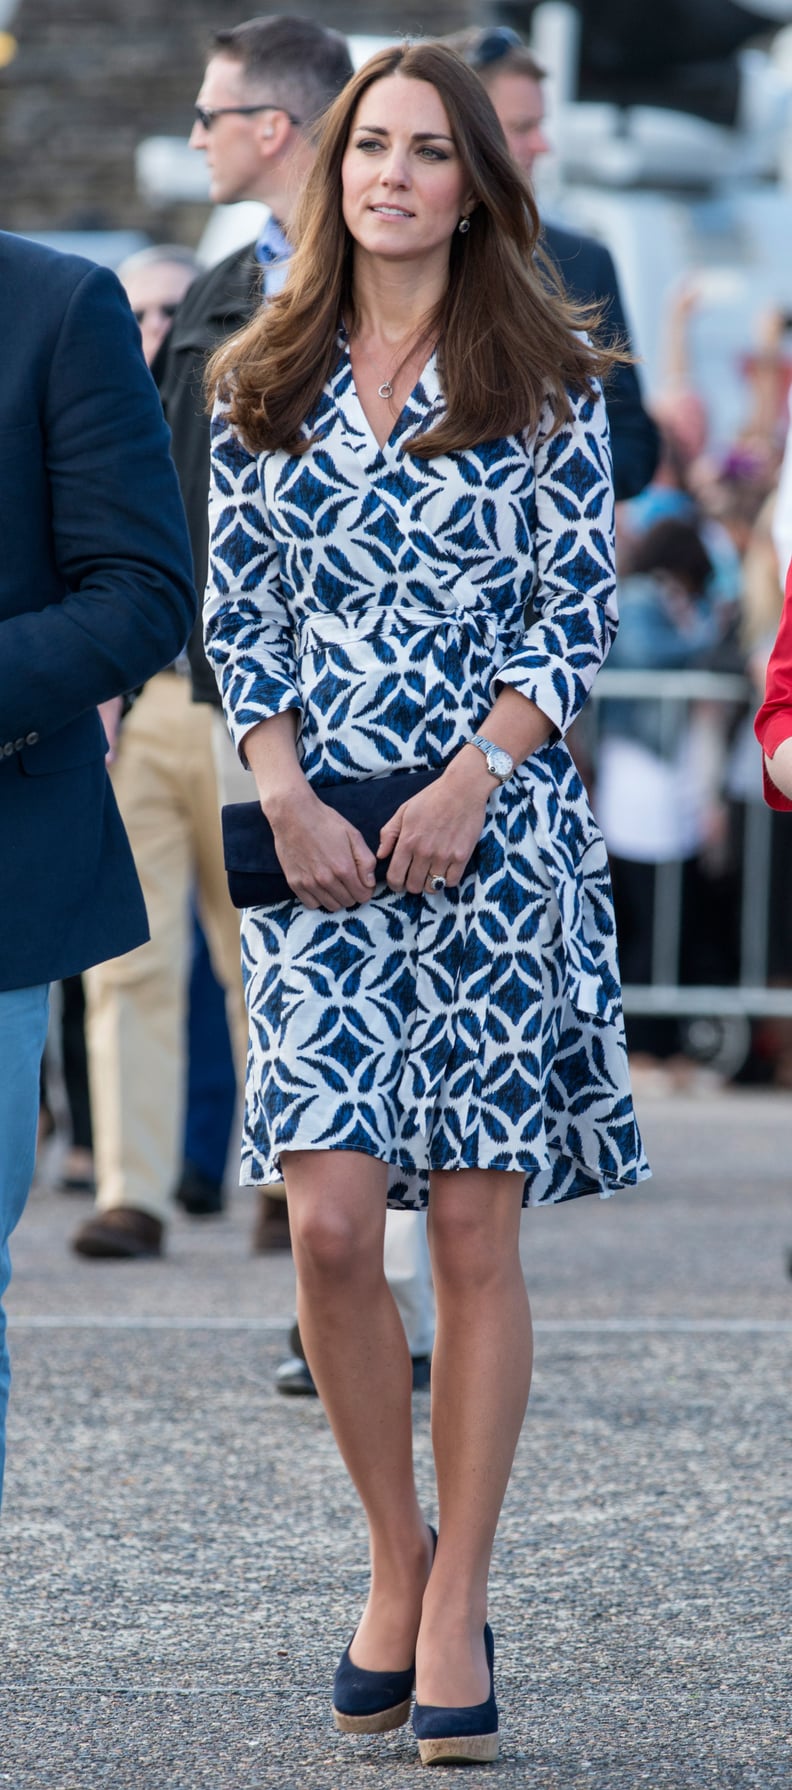 And Kate Middleton Has Rocked Her Pieces as Well